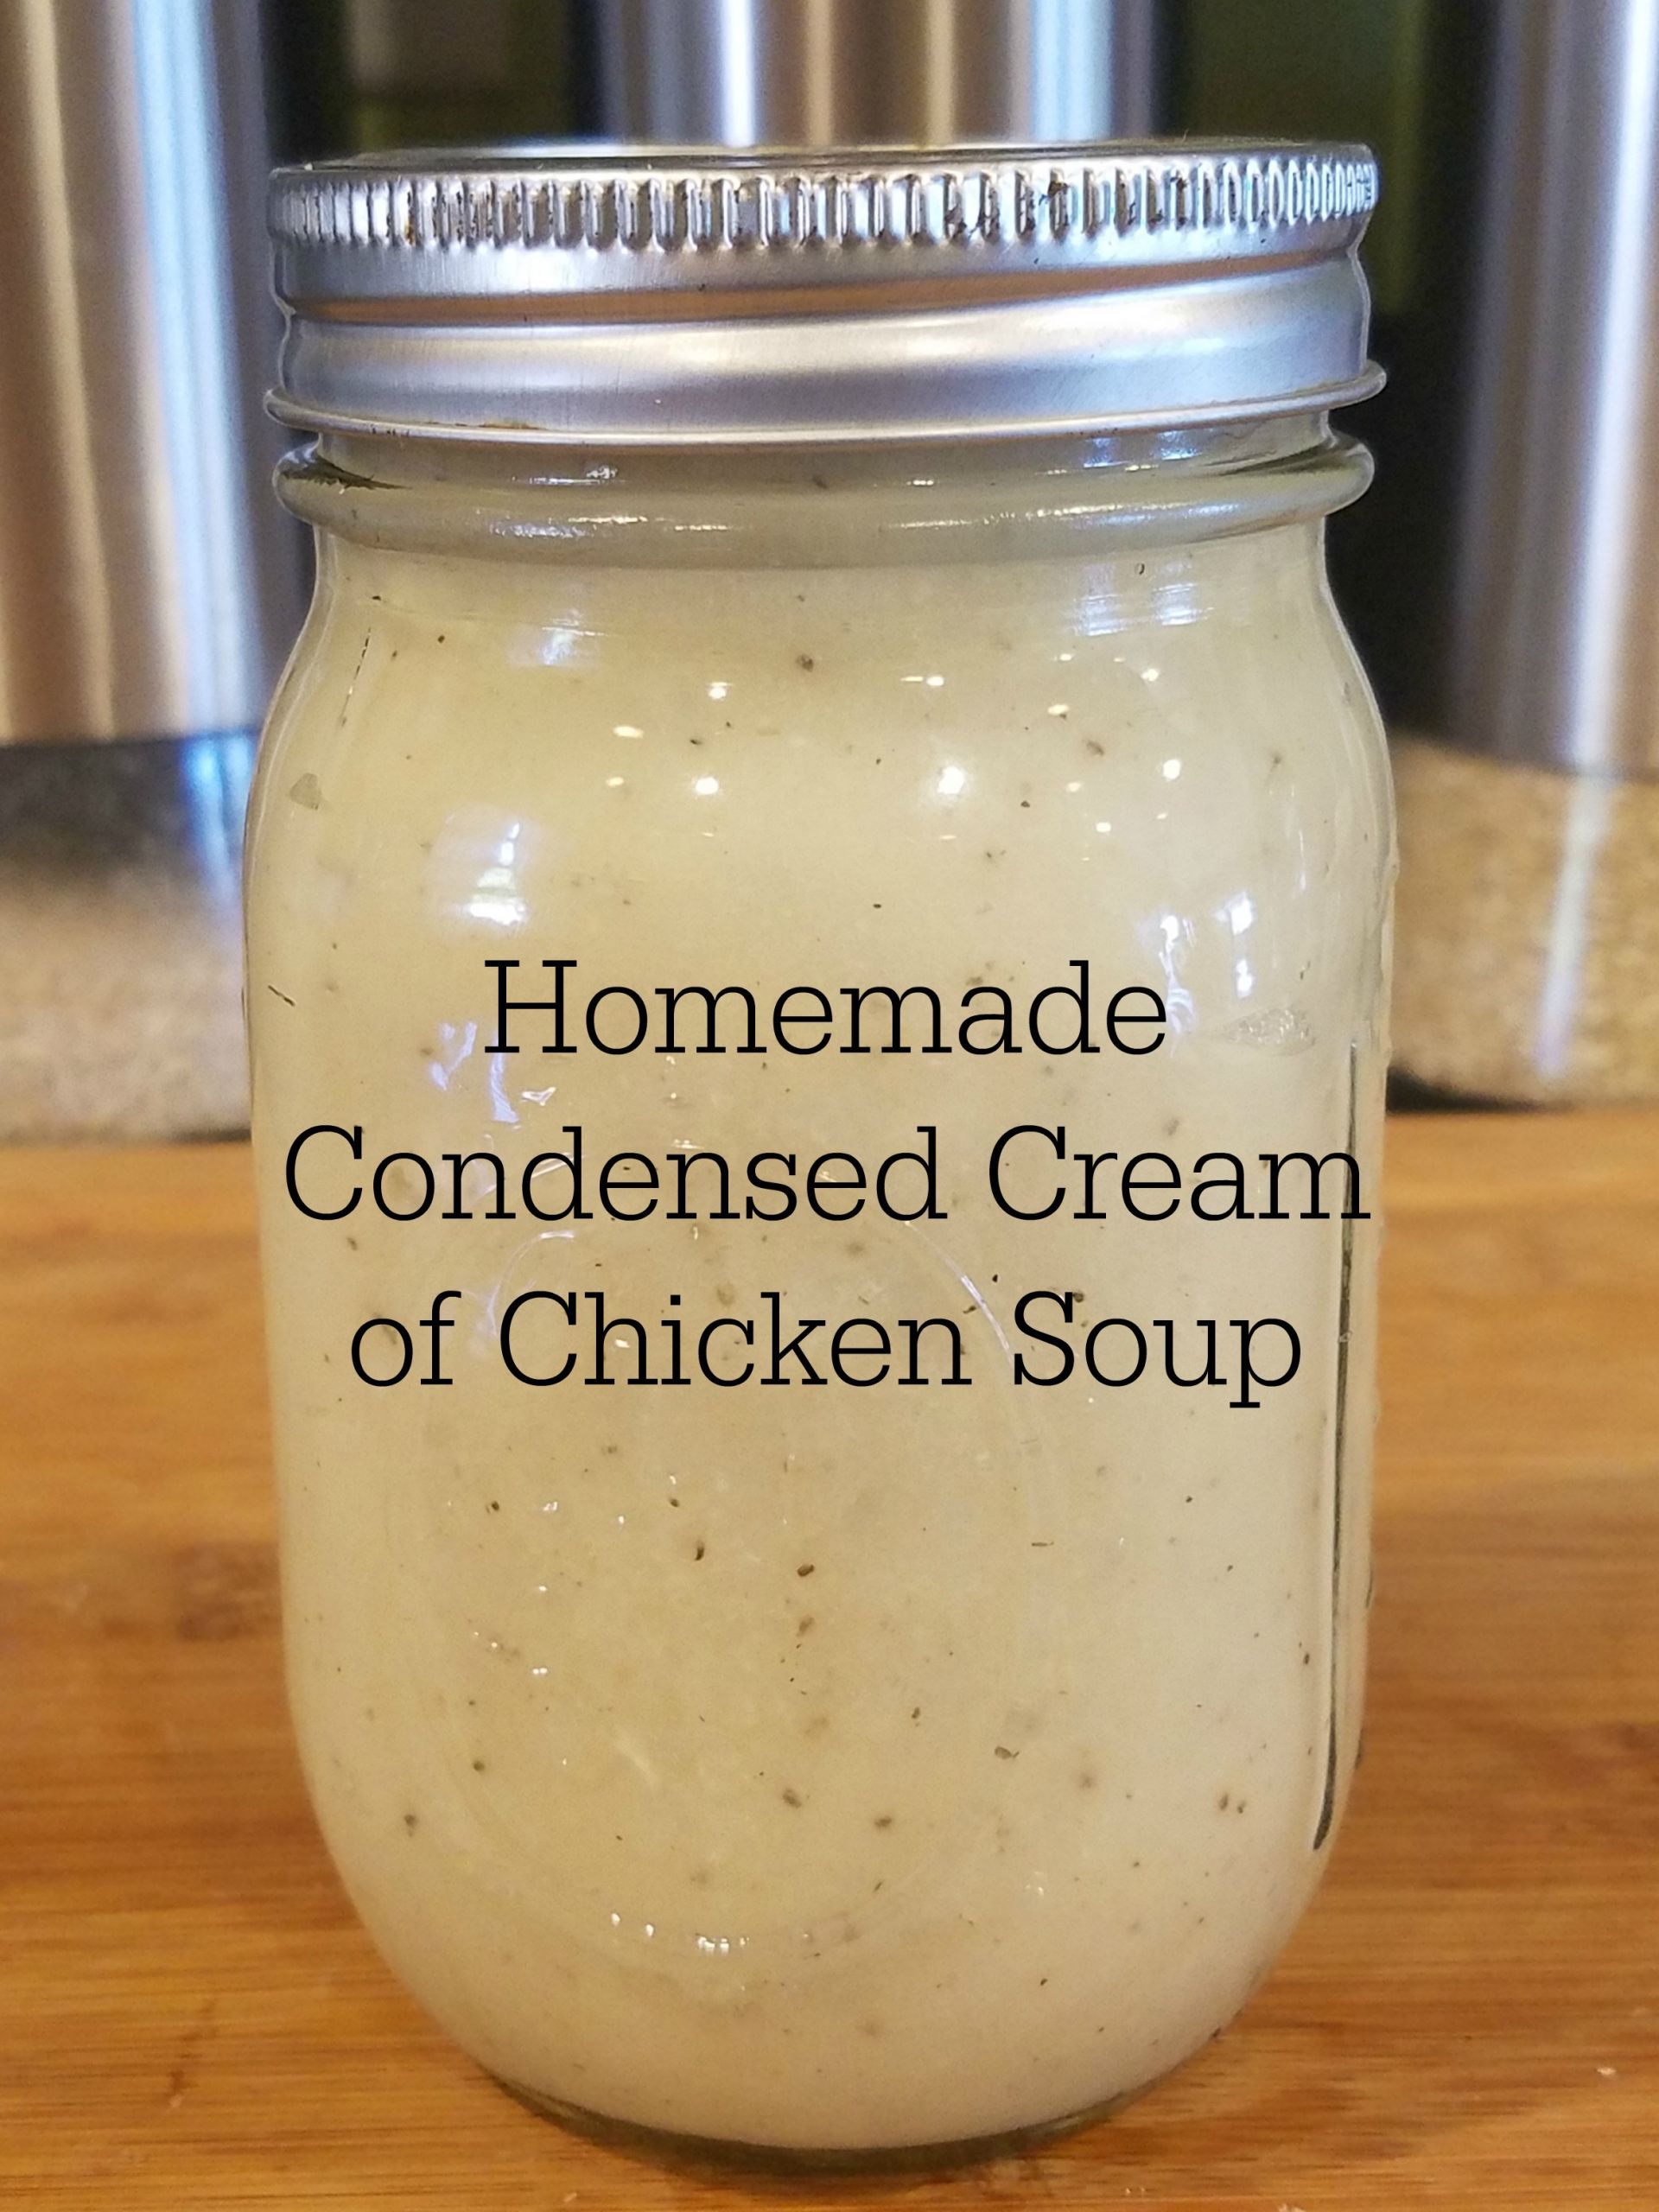 Condensed Cream Of Chicken Soup
 Homemade Condensed Cream of Chicken Soup